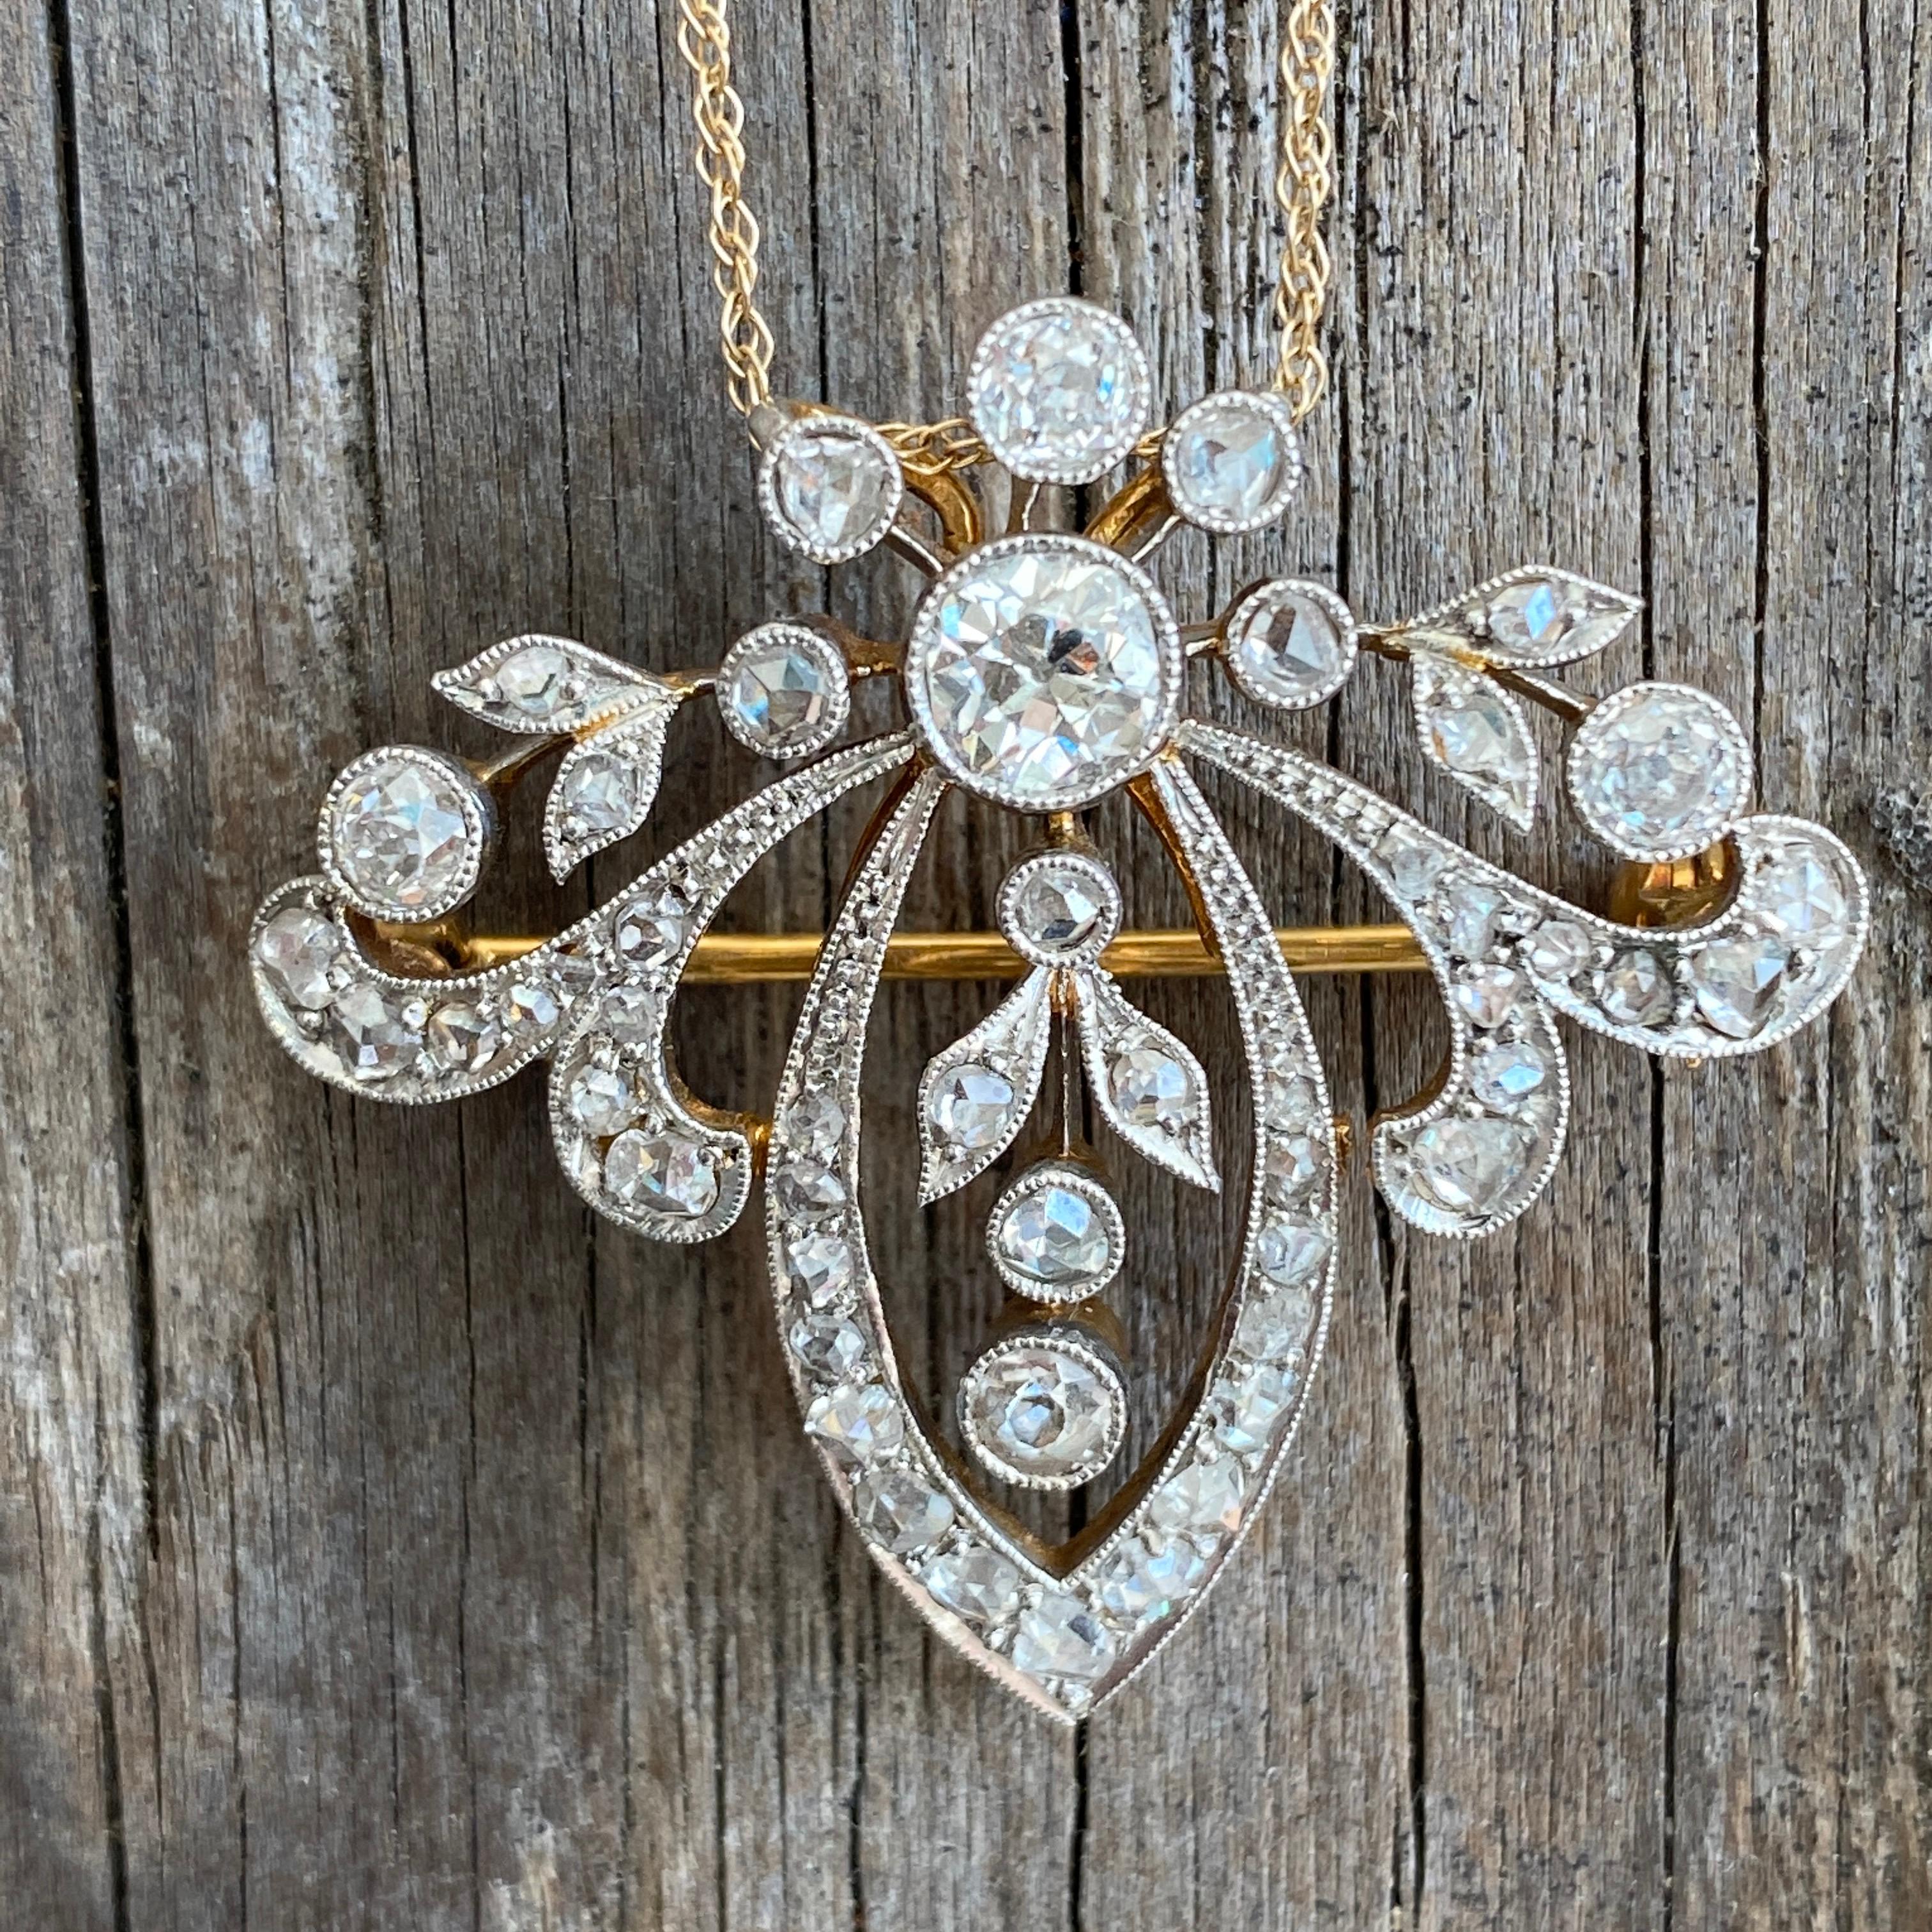 Details:
Edwardian Belle Époque diamond pendant/brooch from the early 1900's. There is a count of 50 diamonds, the largest being 5mm and 1/2 carat. There are 5 large bezel set Old European Cut diamonds and the balance are bead set and bezel set rose